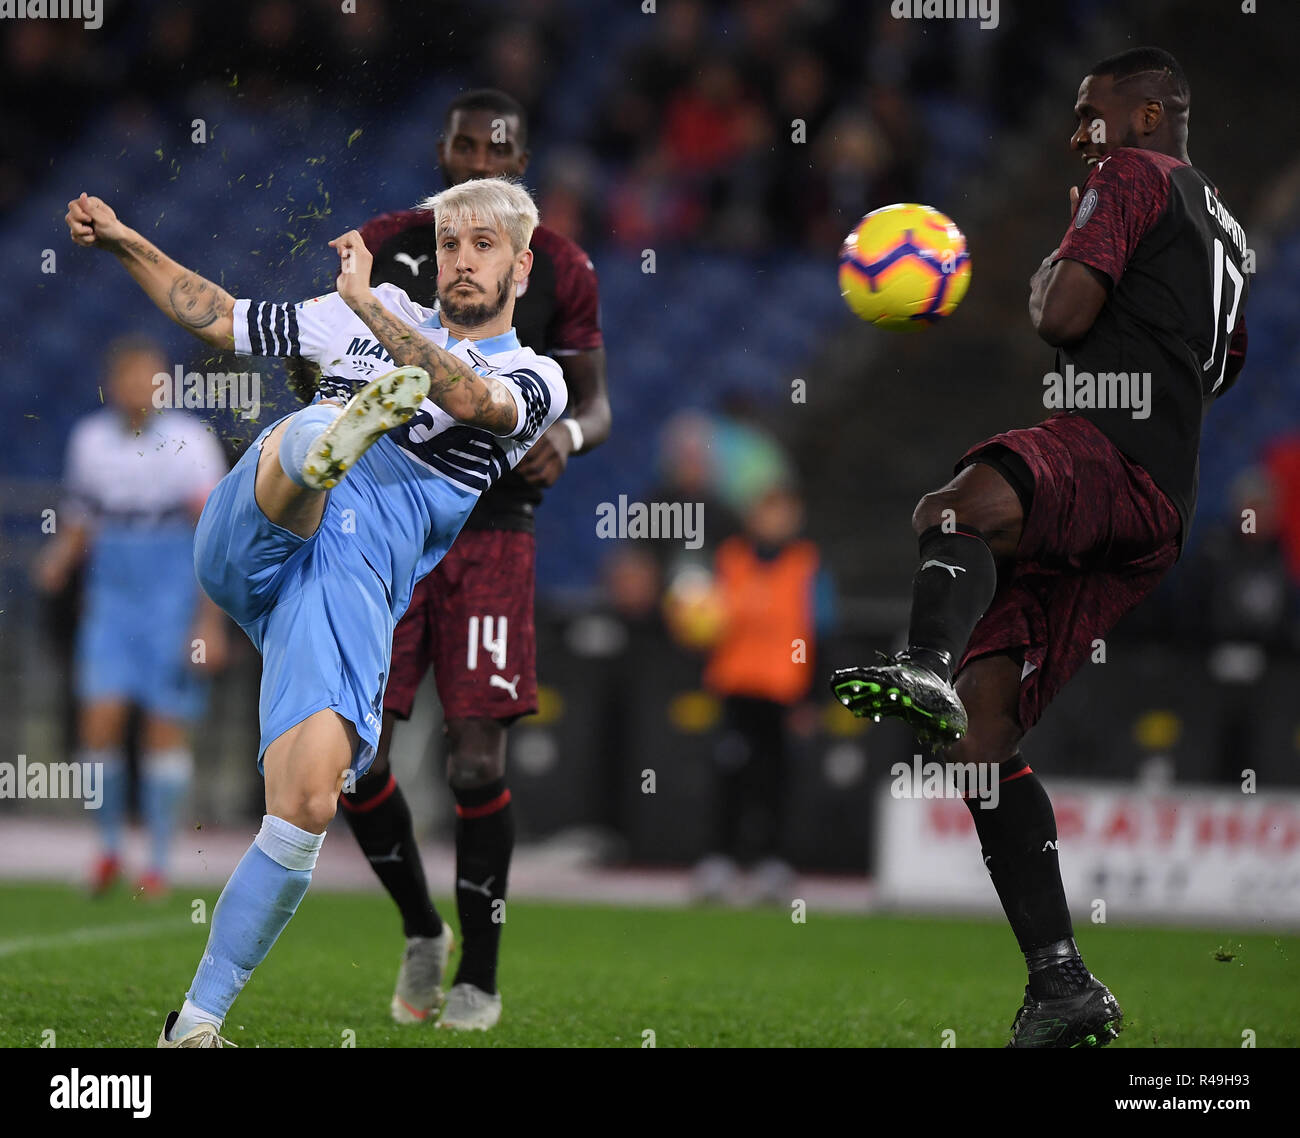 Rome, Italy. 25th Nov, 2018. Lazio's Luis Alberto (L) vies with AC Milan's Cristian Zapata (R) during the Serie A soccer match between Lazio and AC Milan in Rome, Italy, Nov. 25, 2018. The match ended with a 1-1 draw. Credit: Alberto Lingria/Xinhua/Alamy Live News Stock Photo